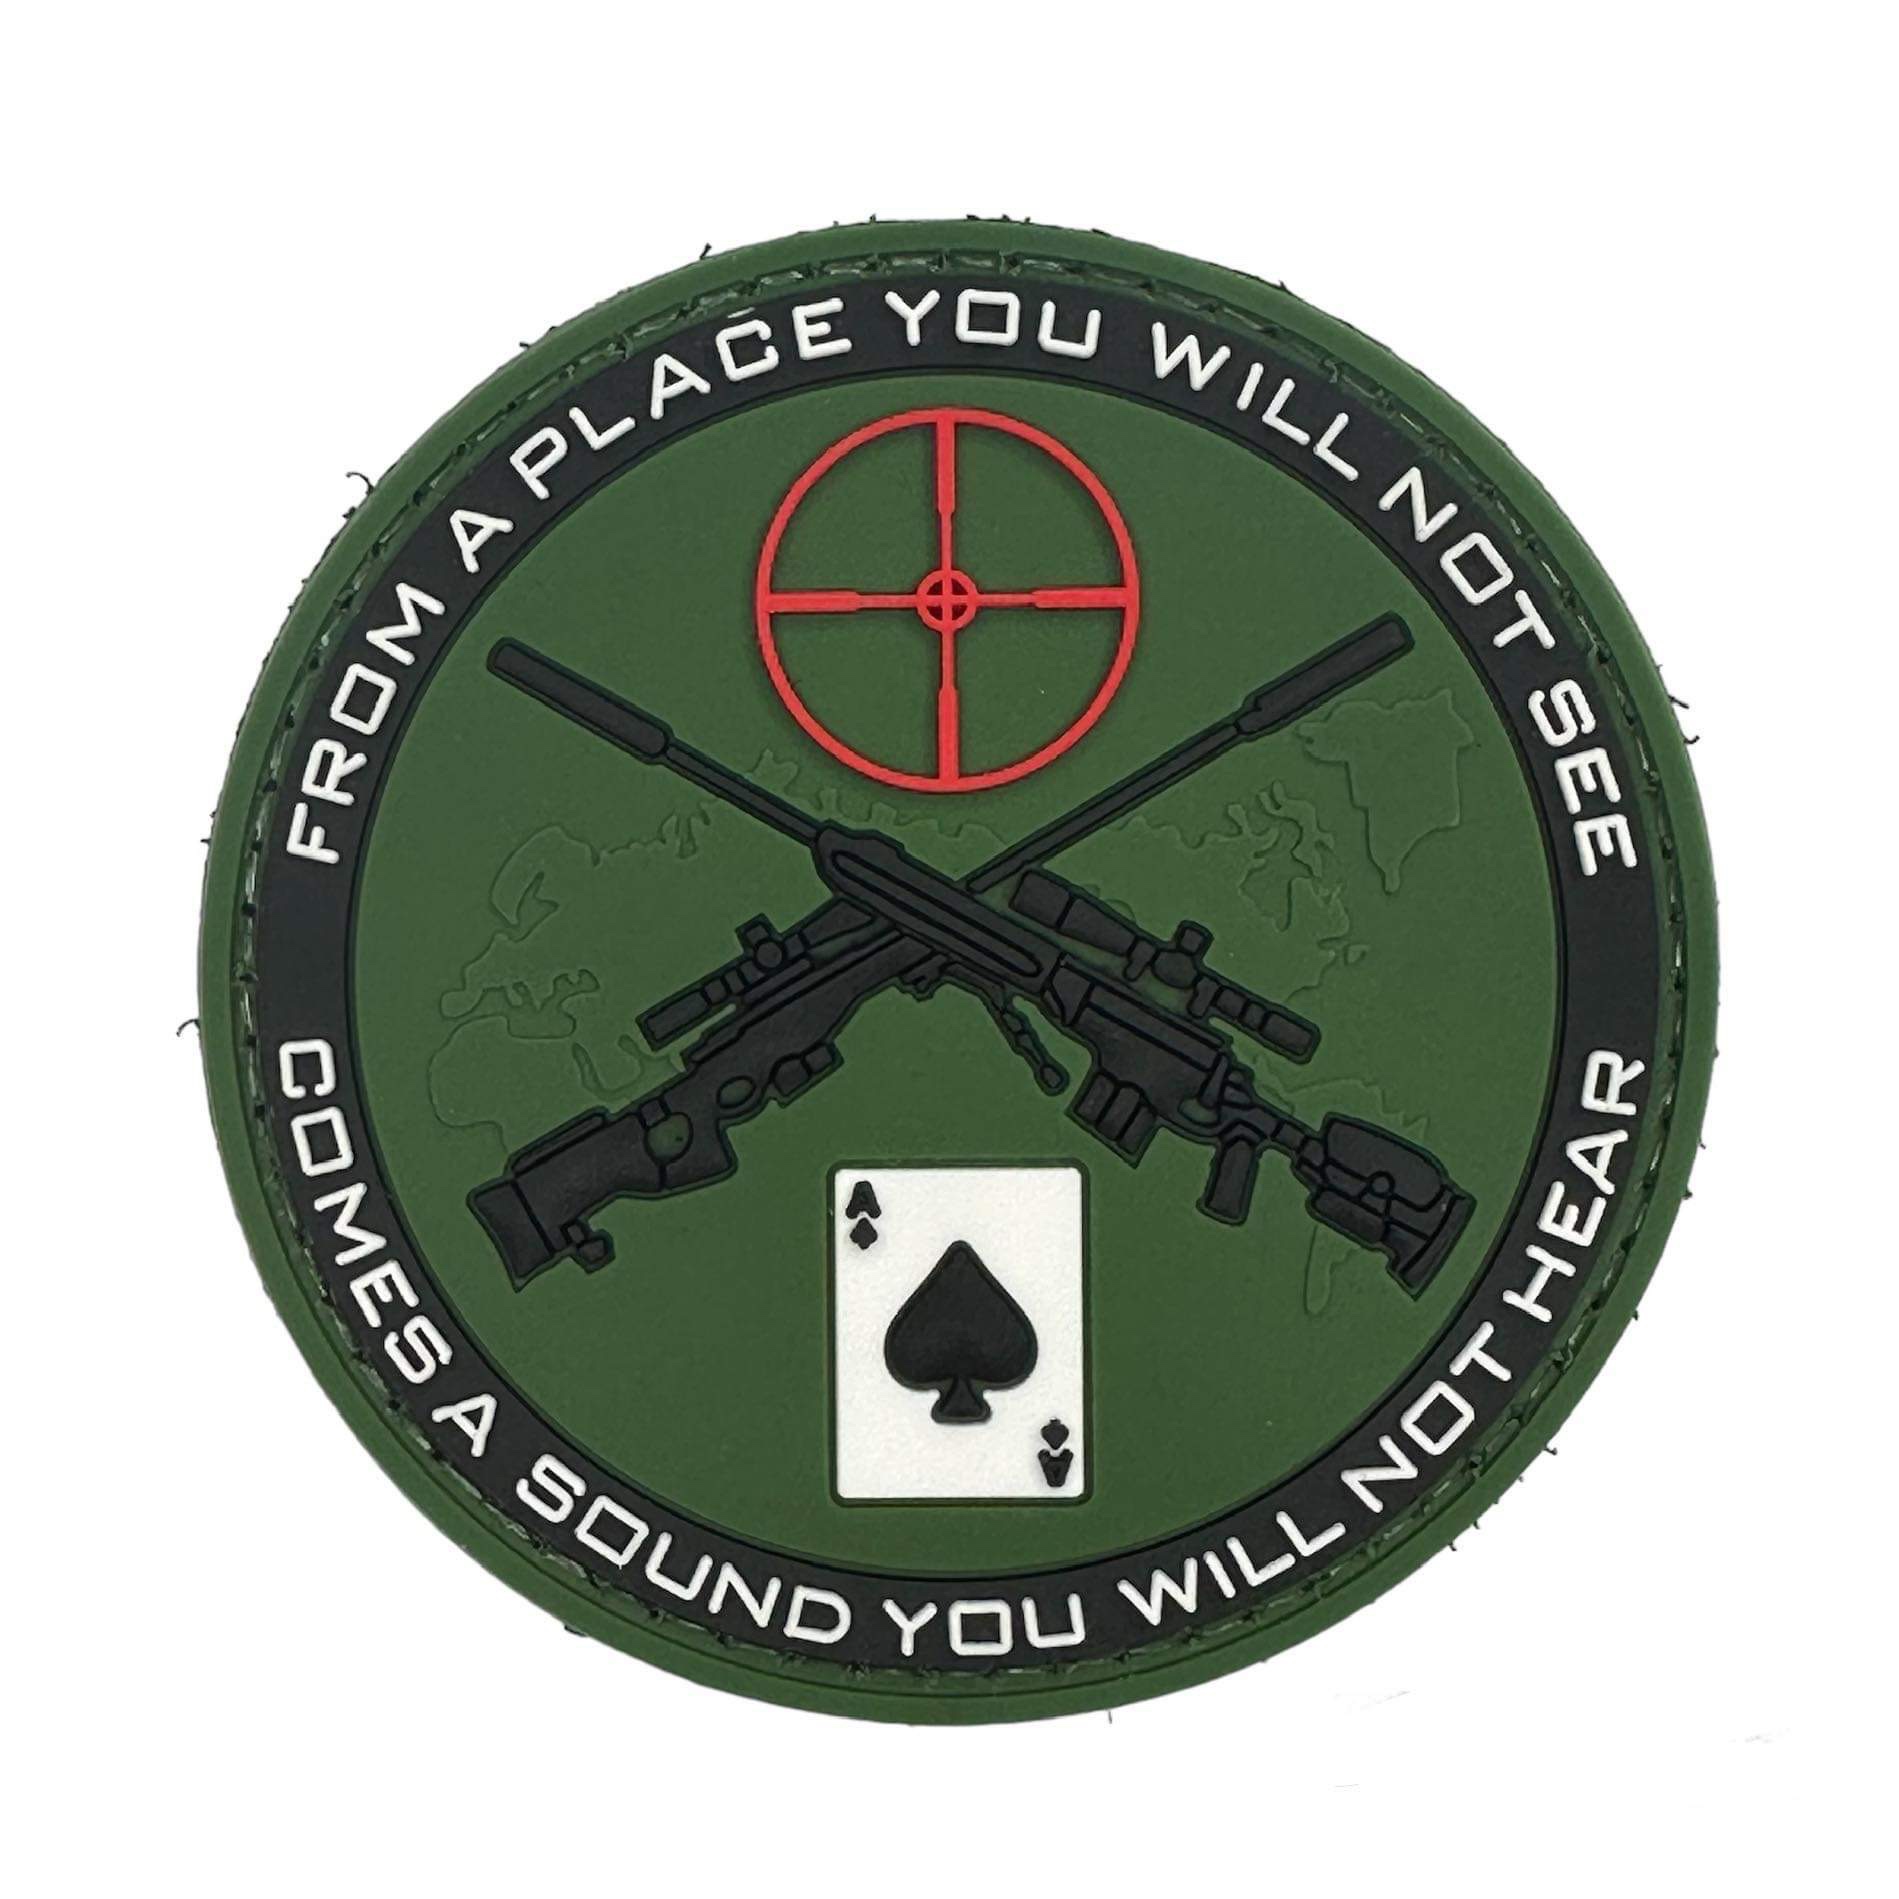 Rubber Patch - From A Place You Will Not See